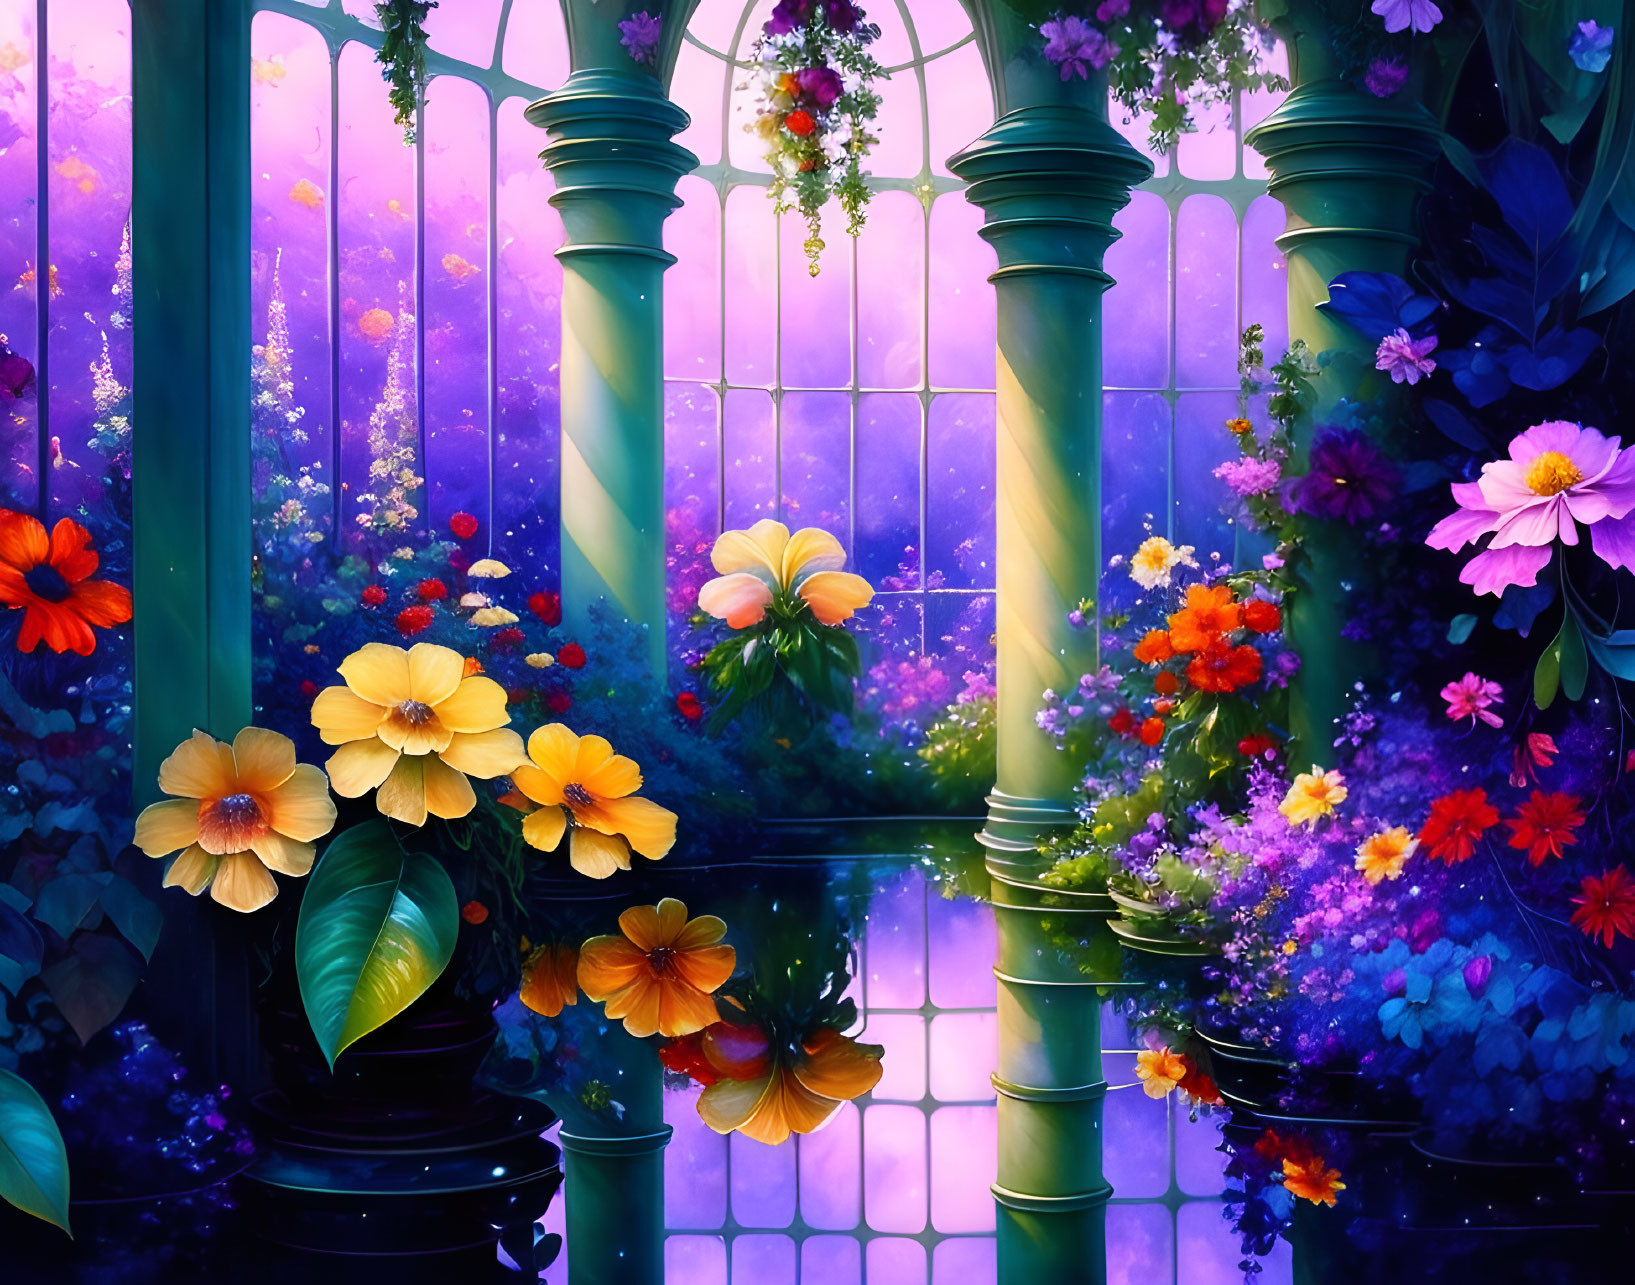 Vibrant flower garden balcony with green columns and purple sunset.